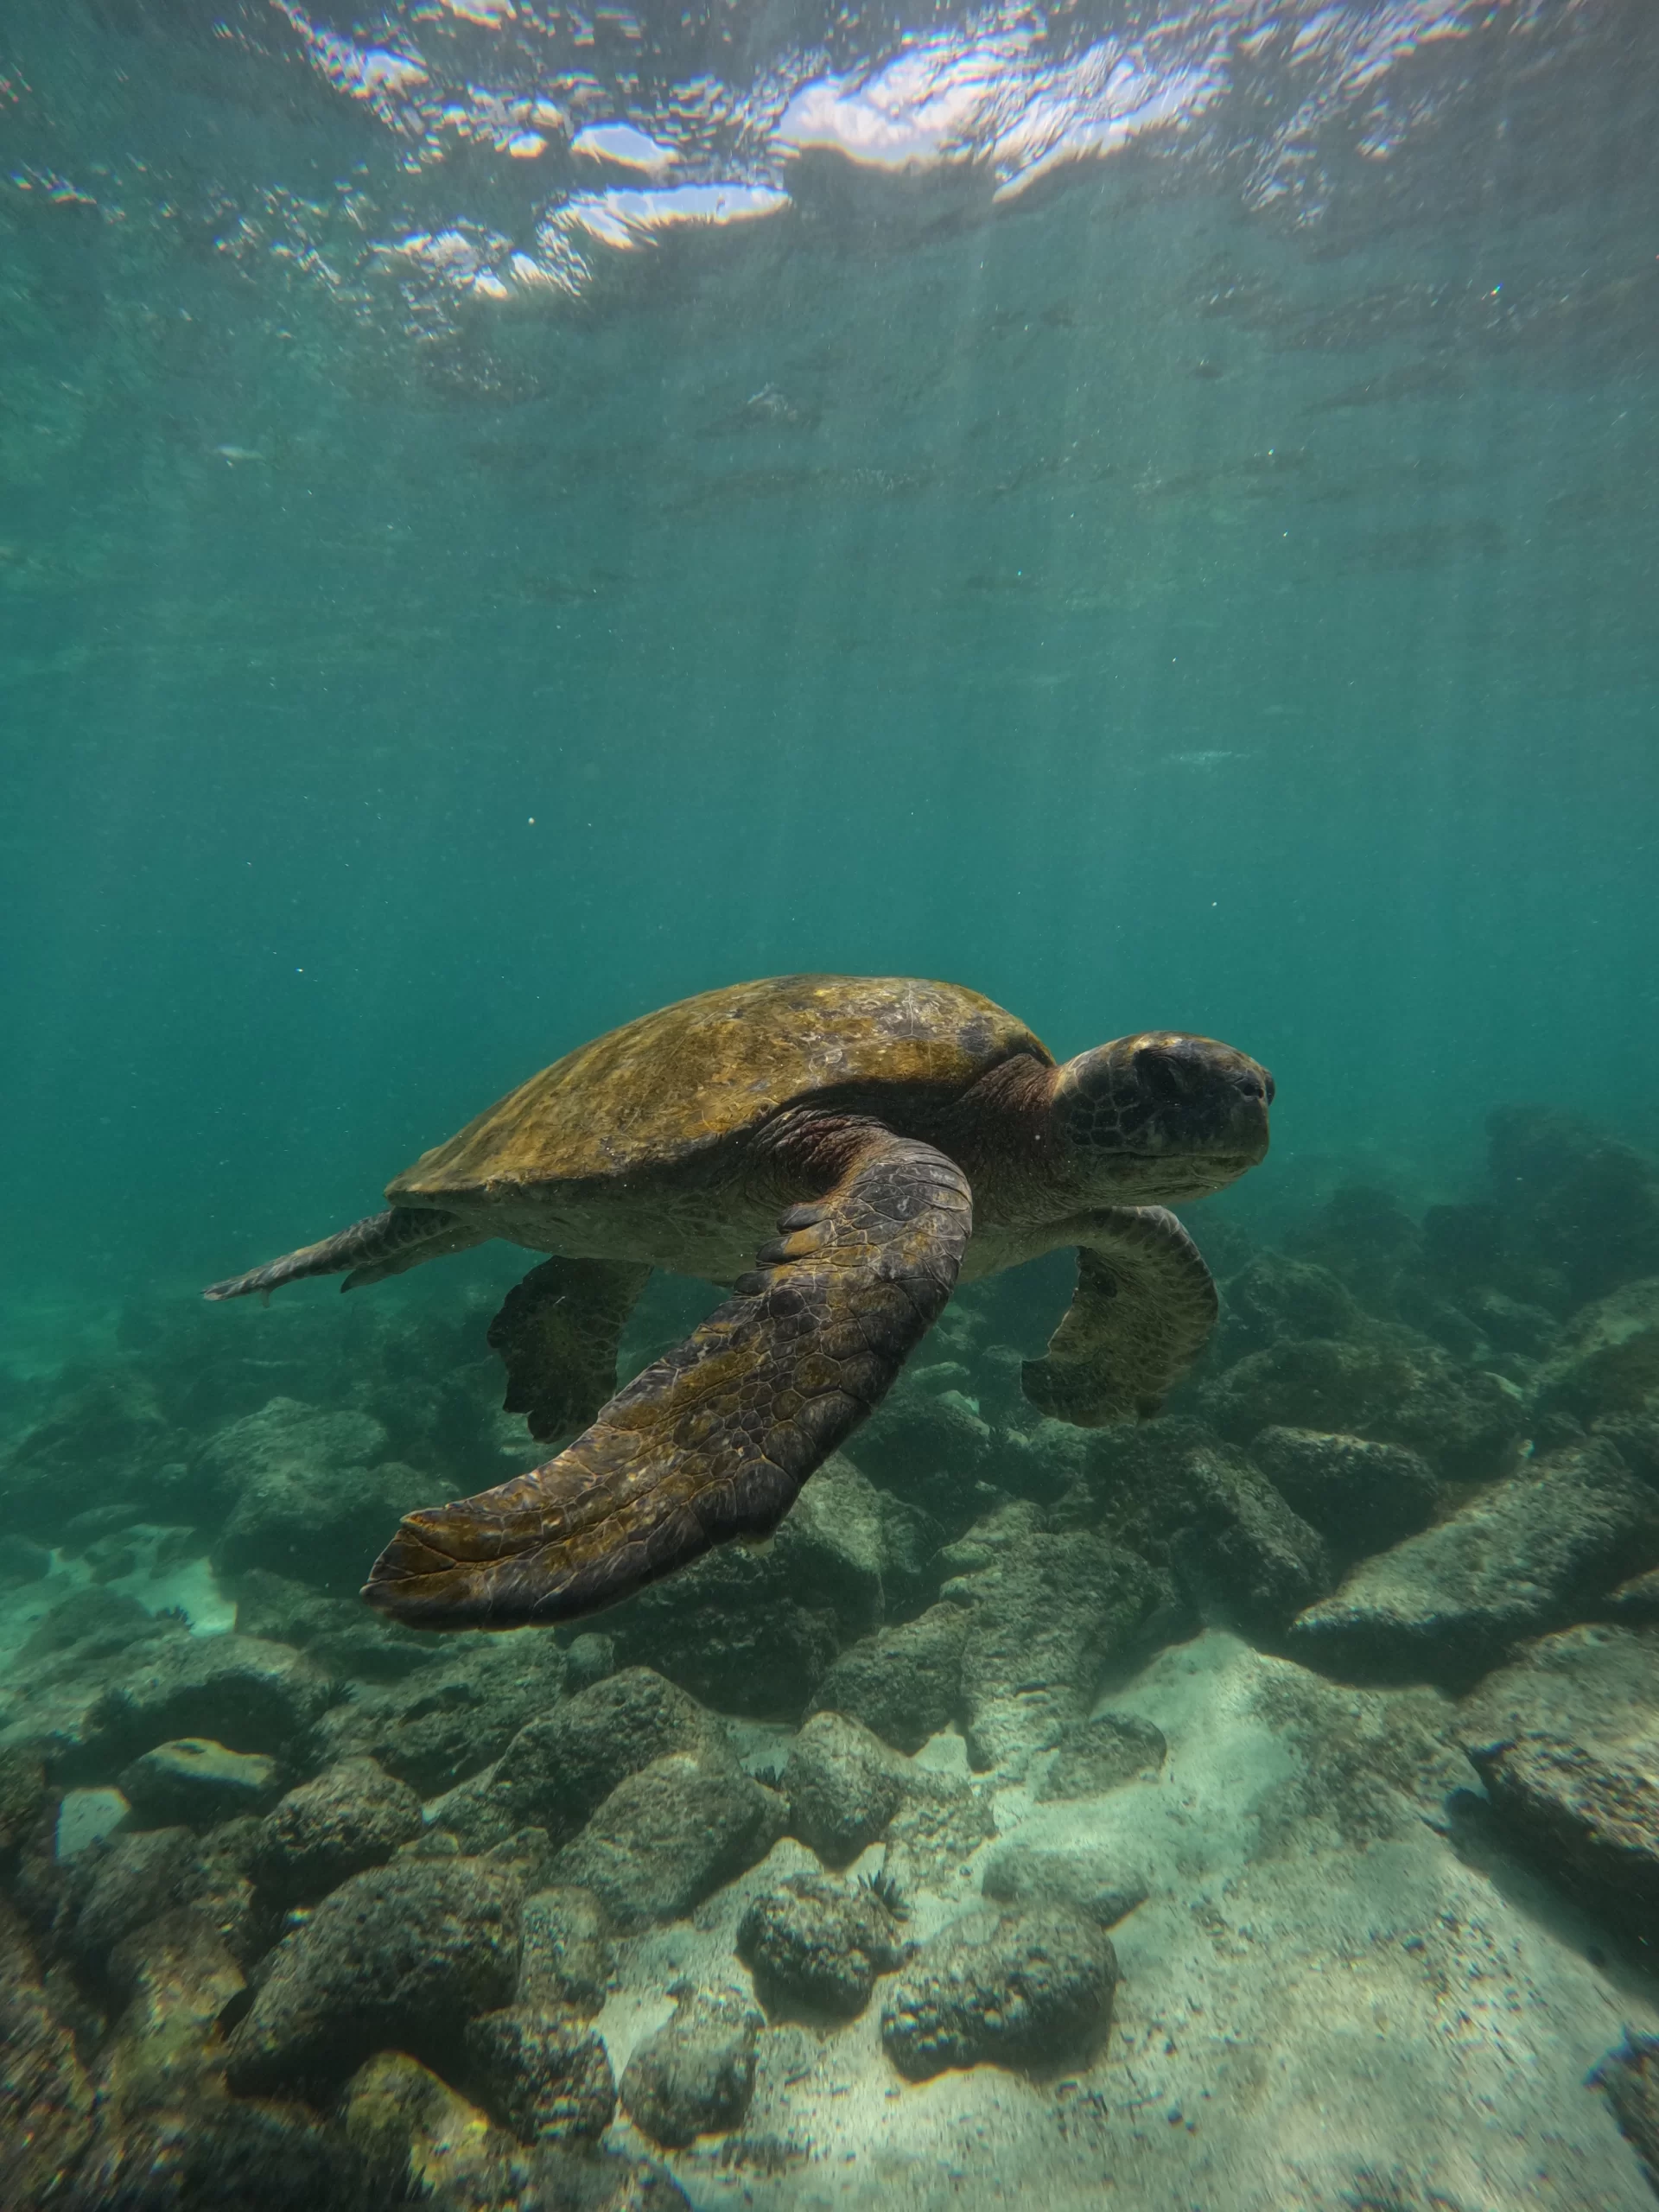 A sea turtle spotted during a snorkeling tour in Galapagos.